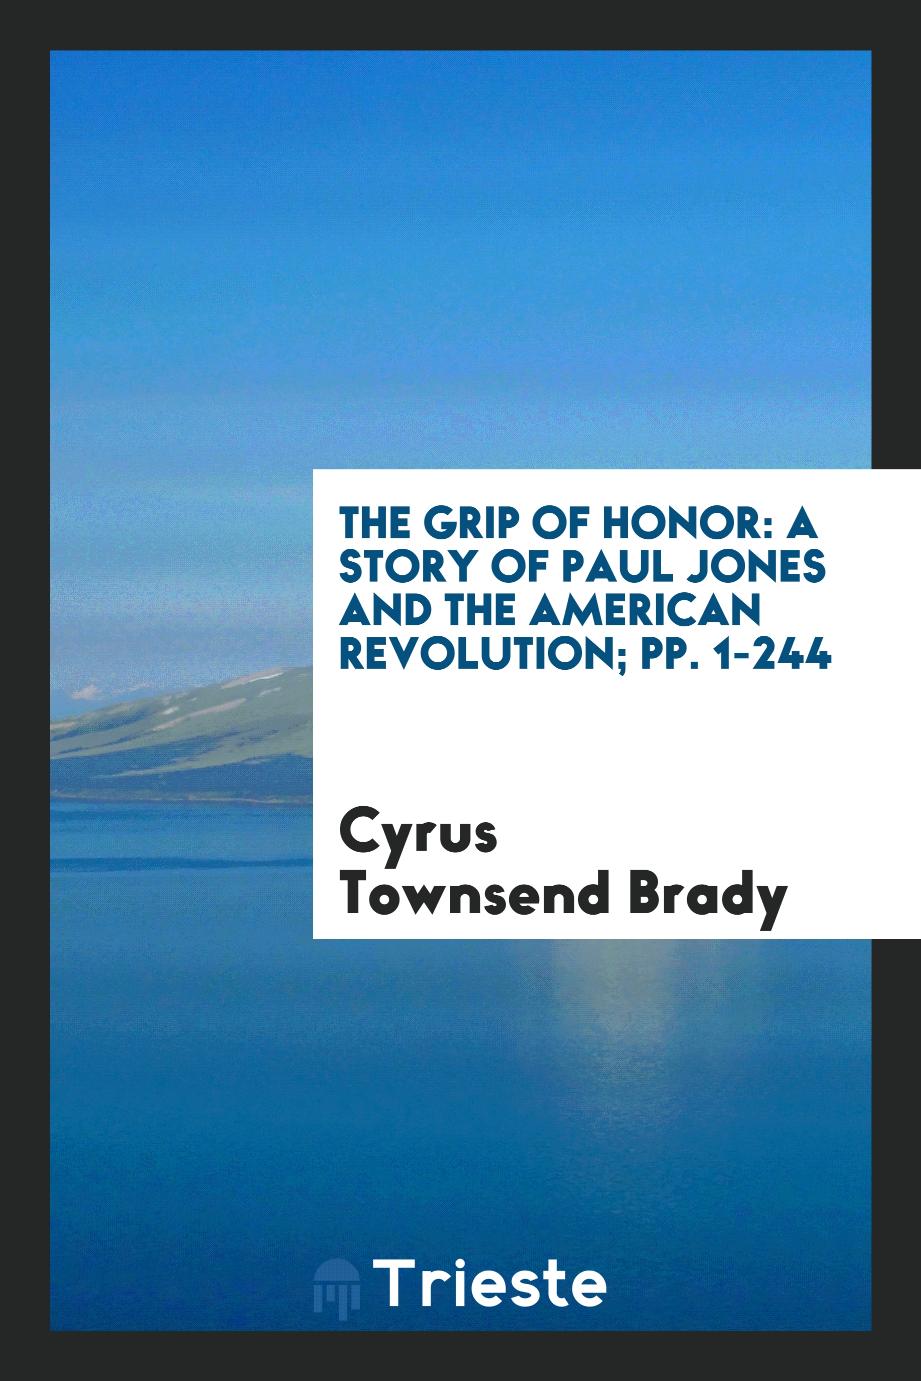 The Grip of Honor: A Story of Paul Jones and the American Revolution; pp. 1-244